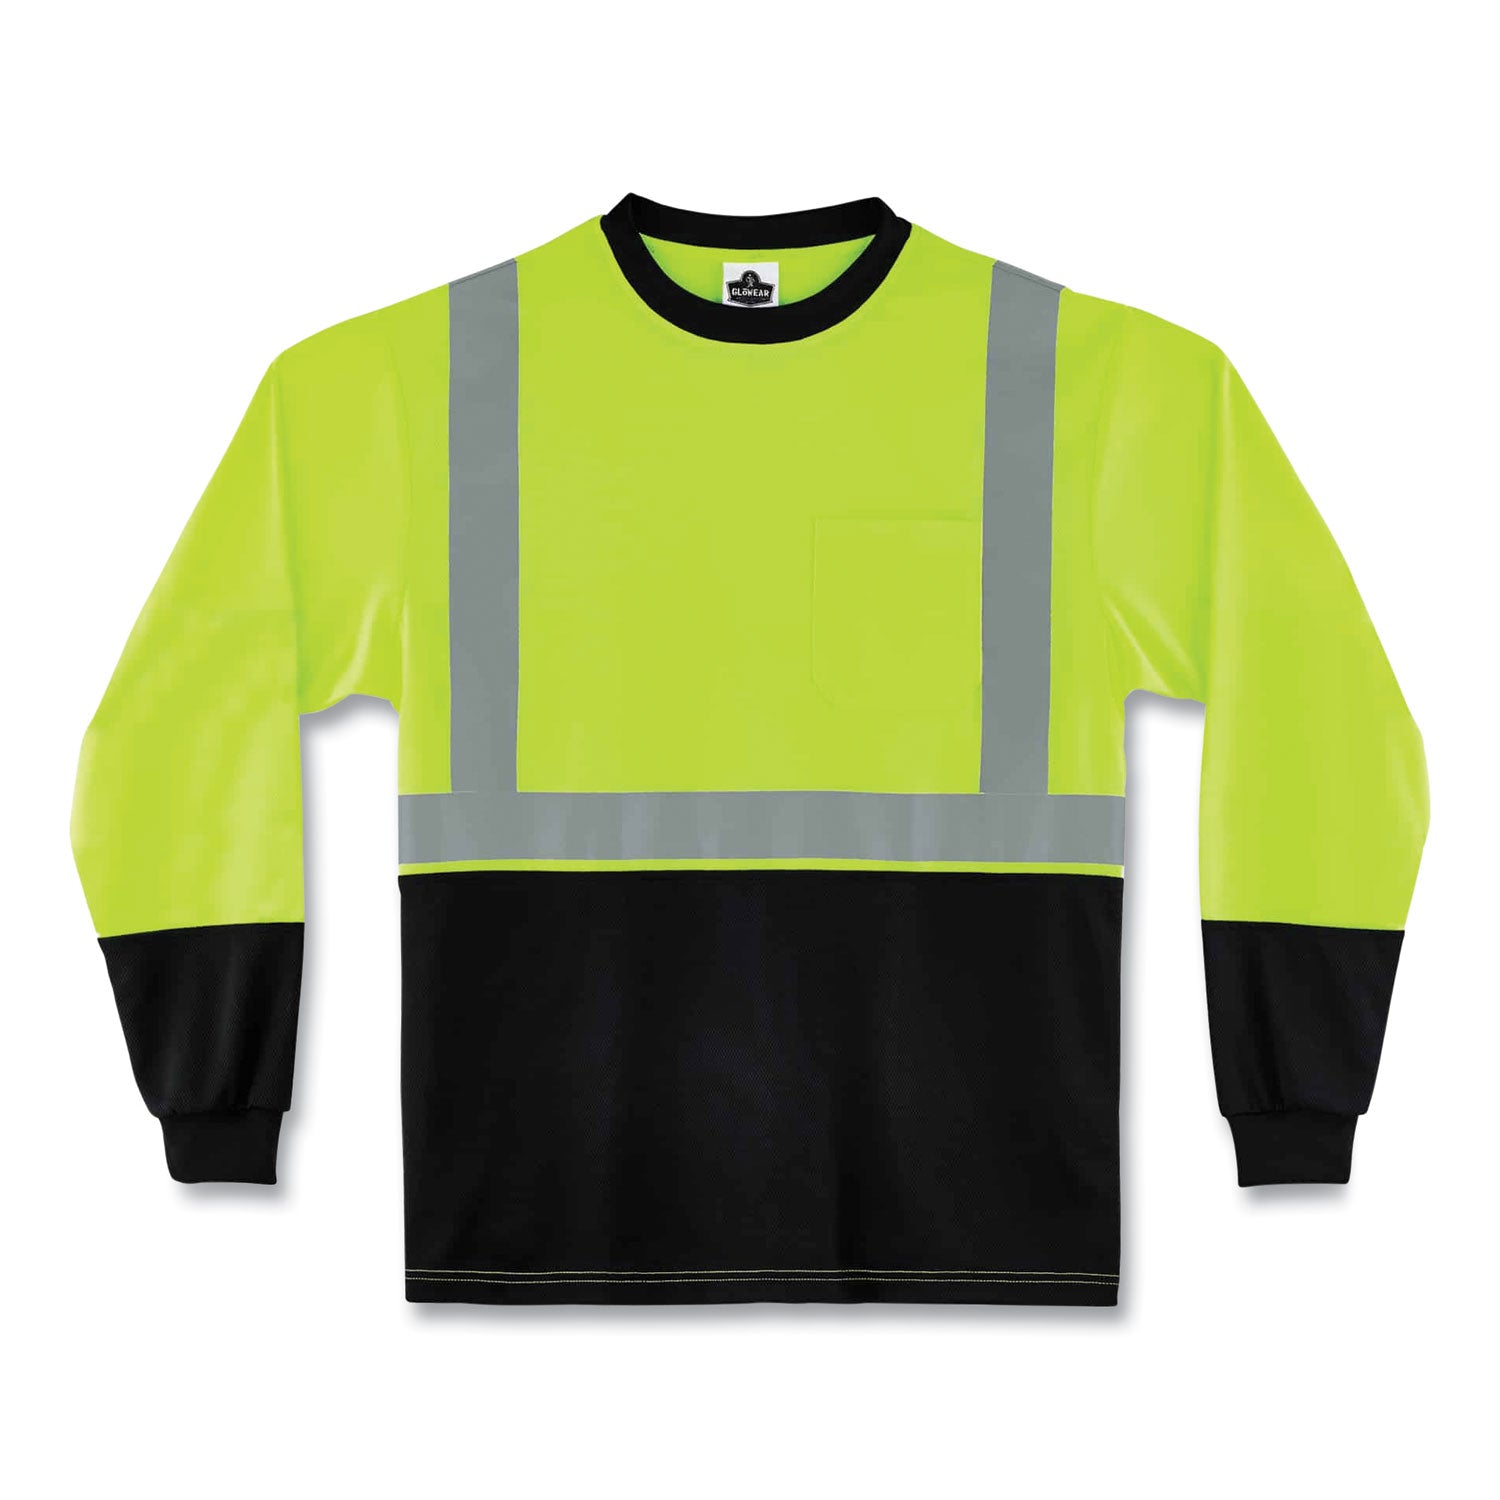 glowear-8291bk-type-r-class-2-black-front-long-sleeve-t-shirt-polyester-large-lime-ships-in-1-3-business-days_ego22704 - 1